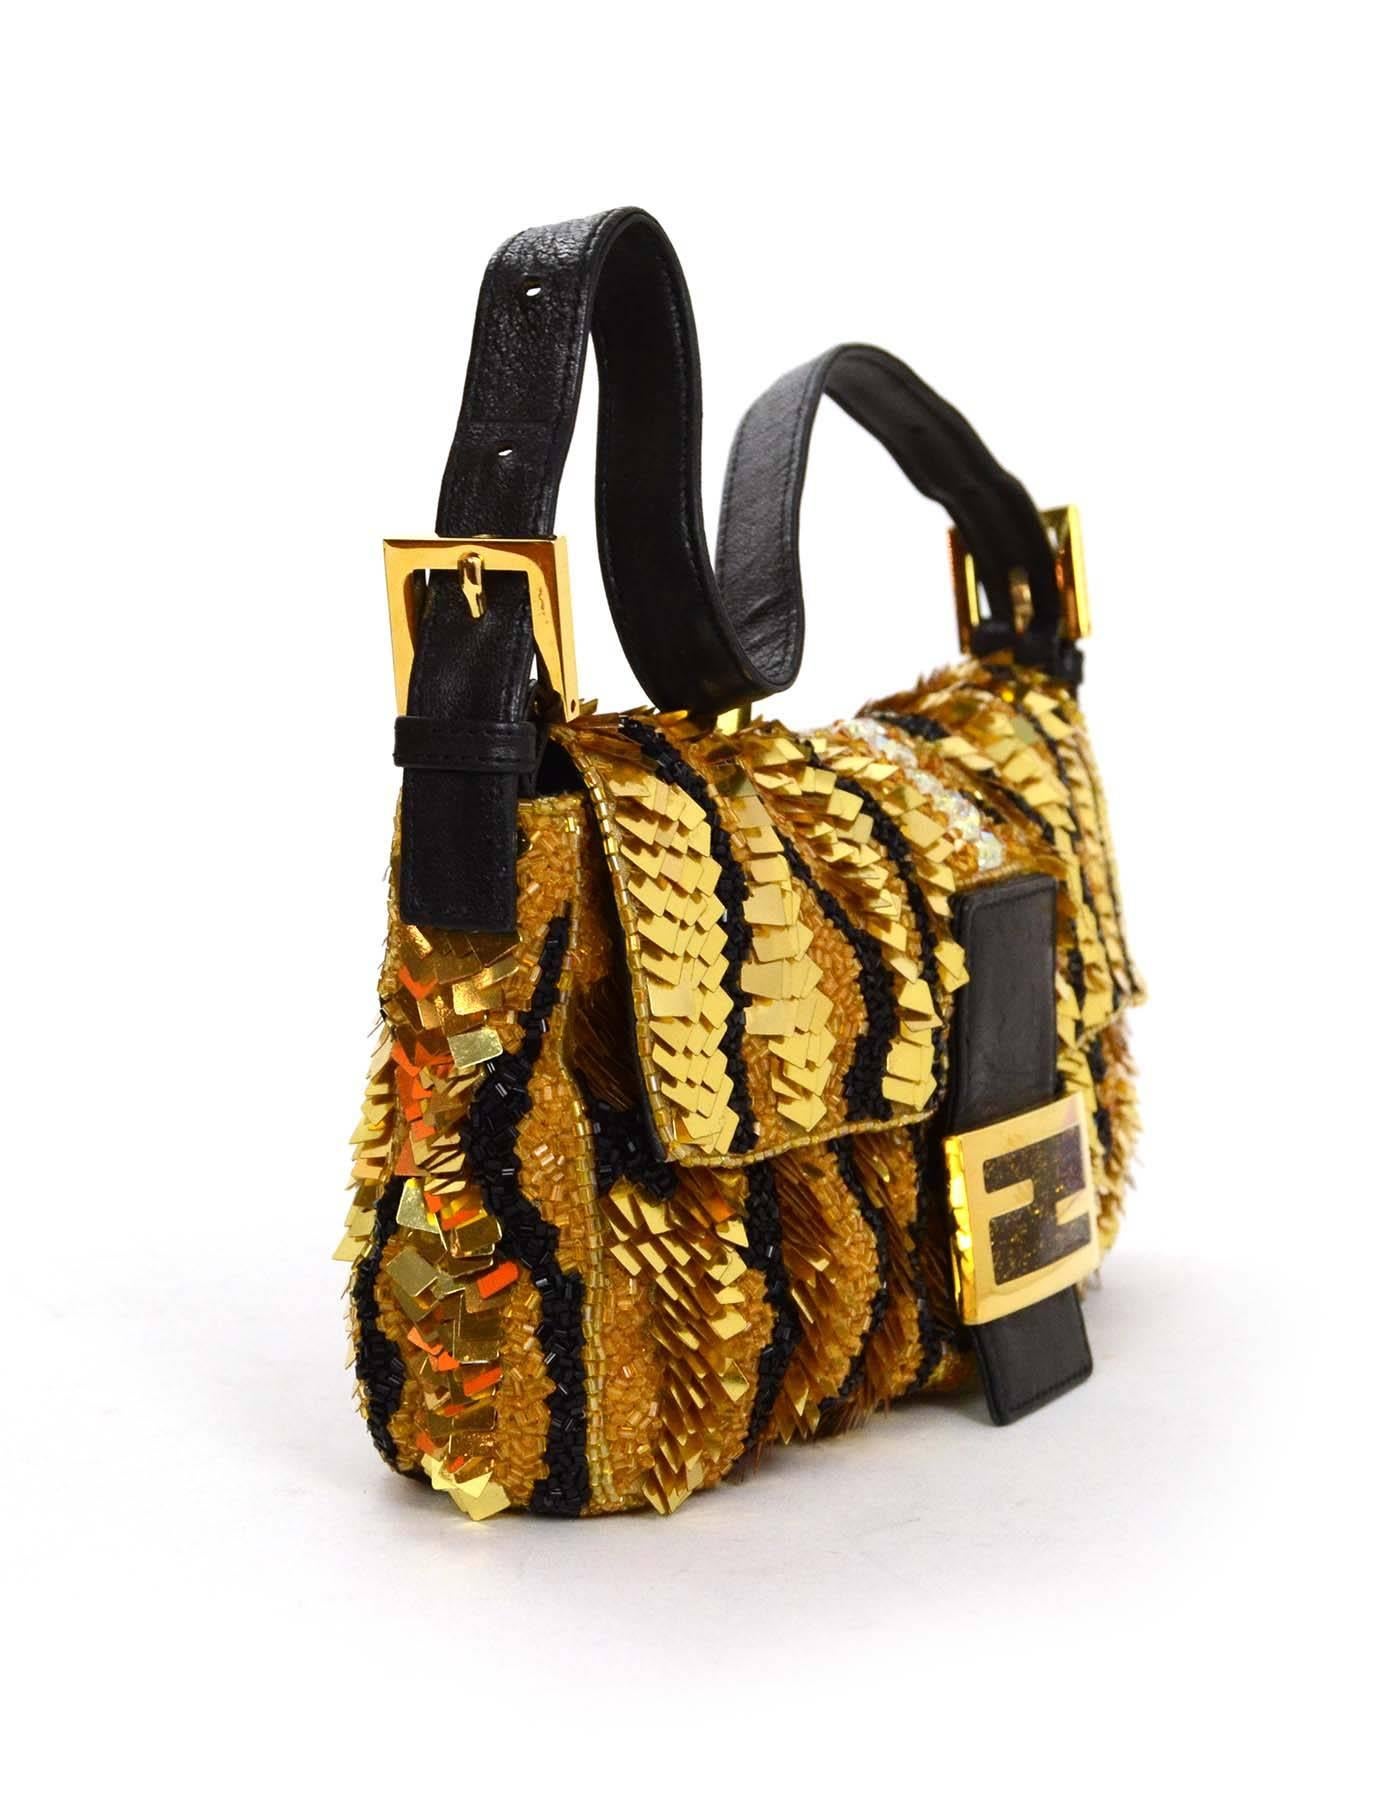 Fendi Gold & Black Sequin Baguette
Features detachable black leather shoulder strap
Made In: Italy
Color: Gold and black
Hardware: Goldtone
Materials: Leather, beads and sequins
Lining: Black satin
Closure/Opening: Flap top with magnetic snap